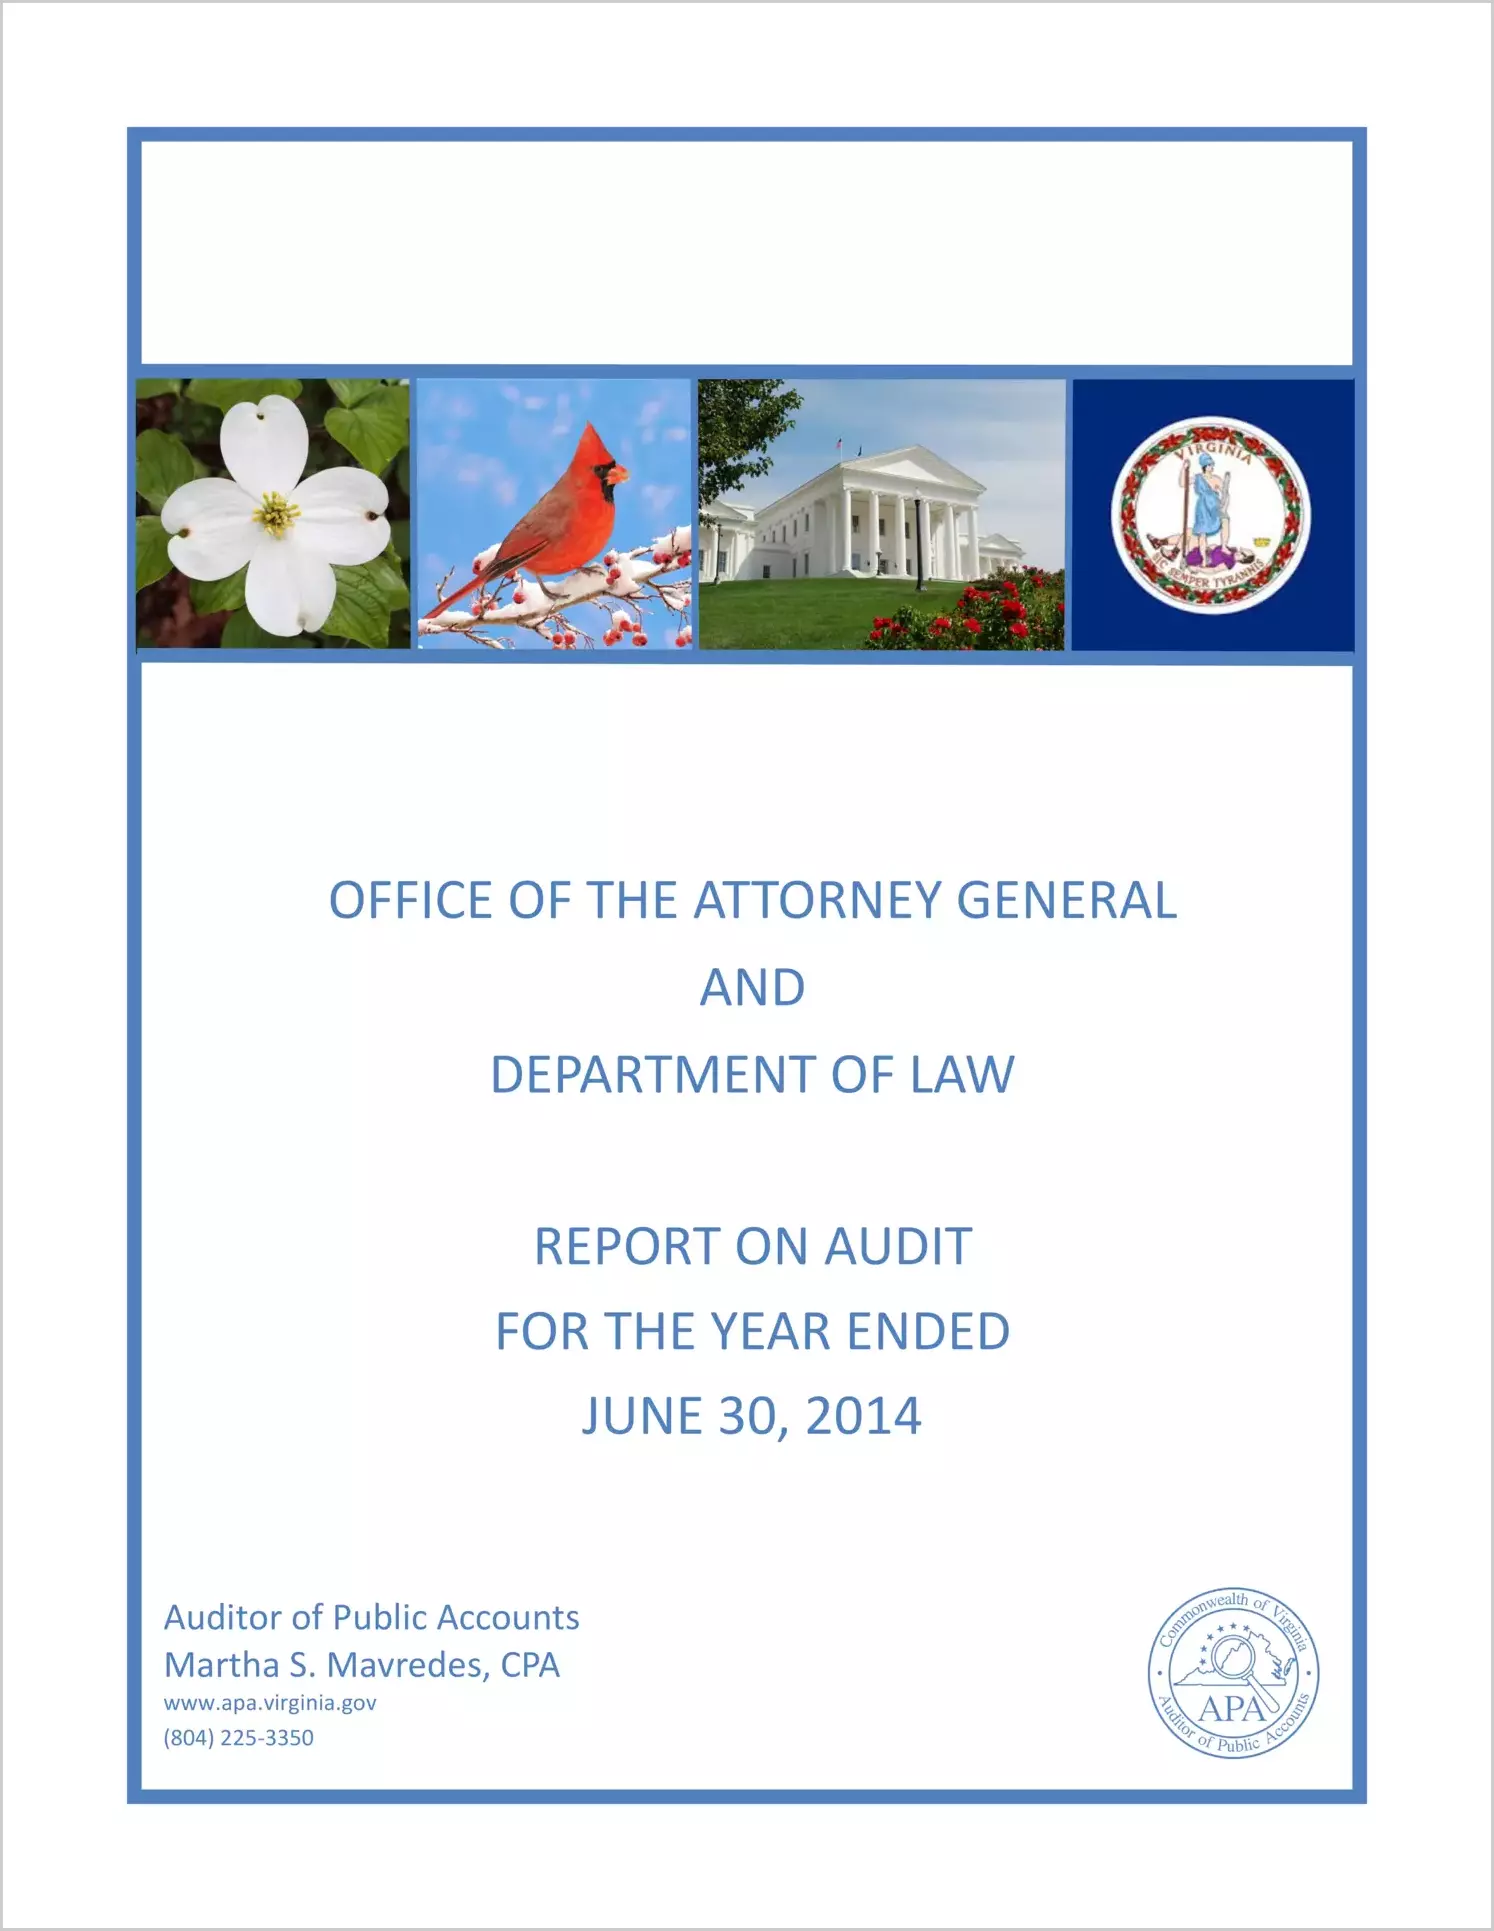 Office Of The Attorney General And The Department Of Law Report On Audit For The Year Ended June 30, 2014